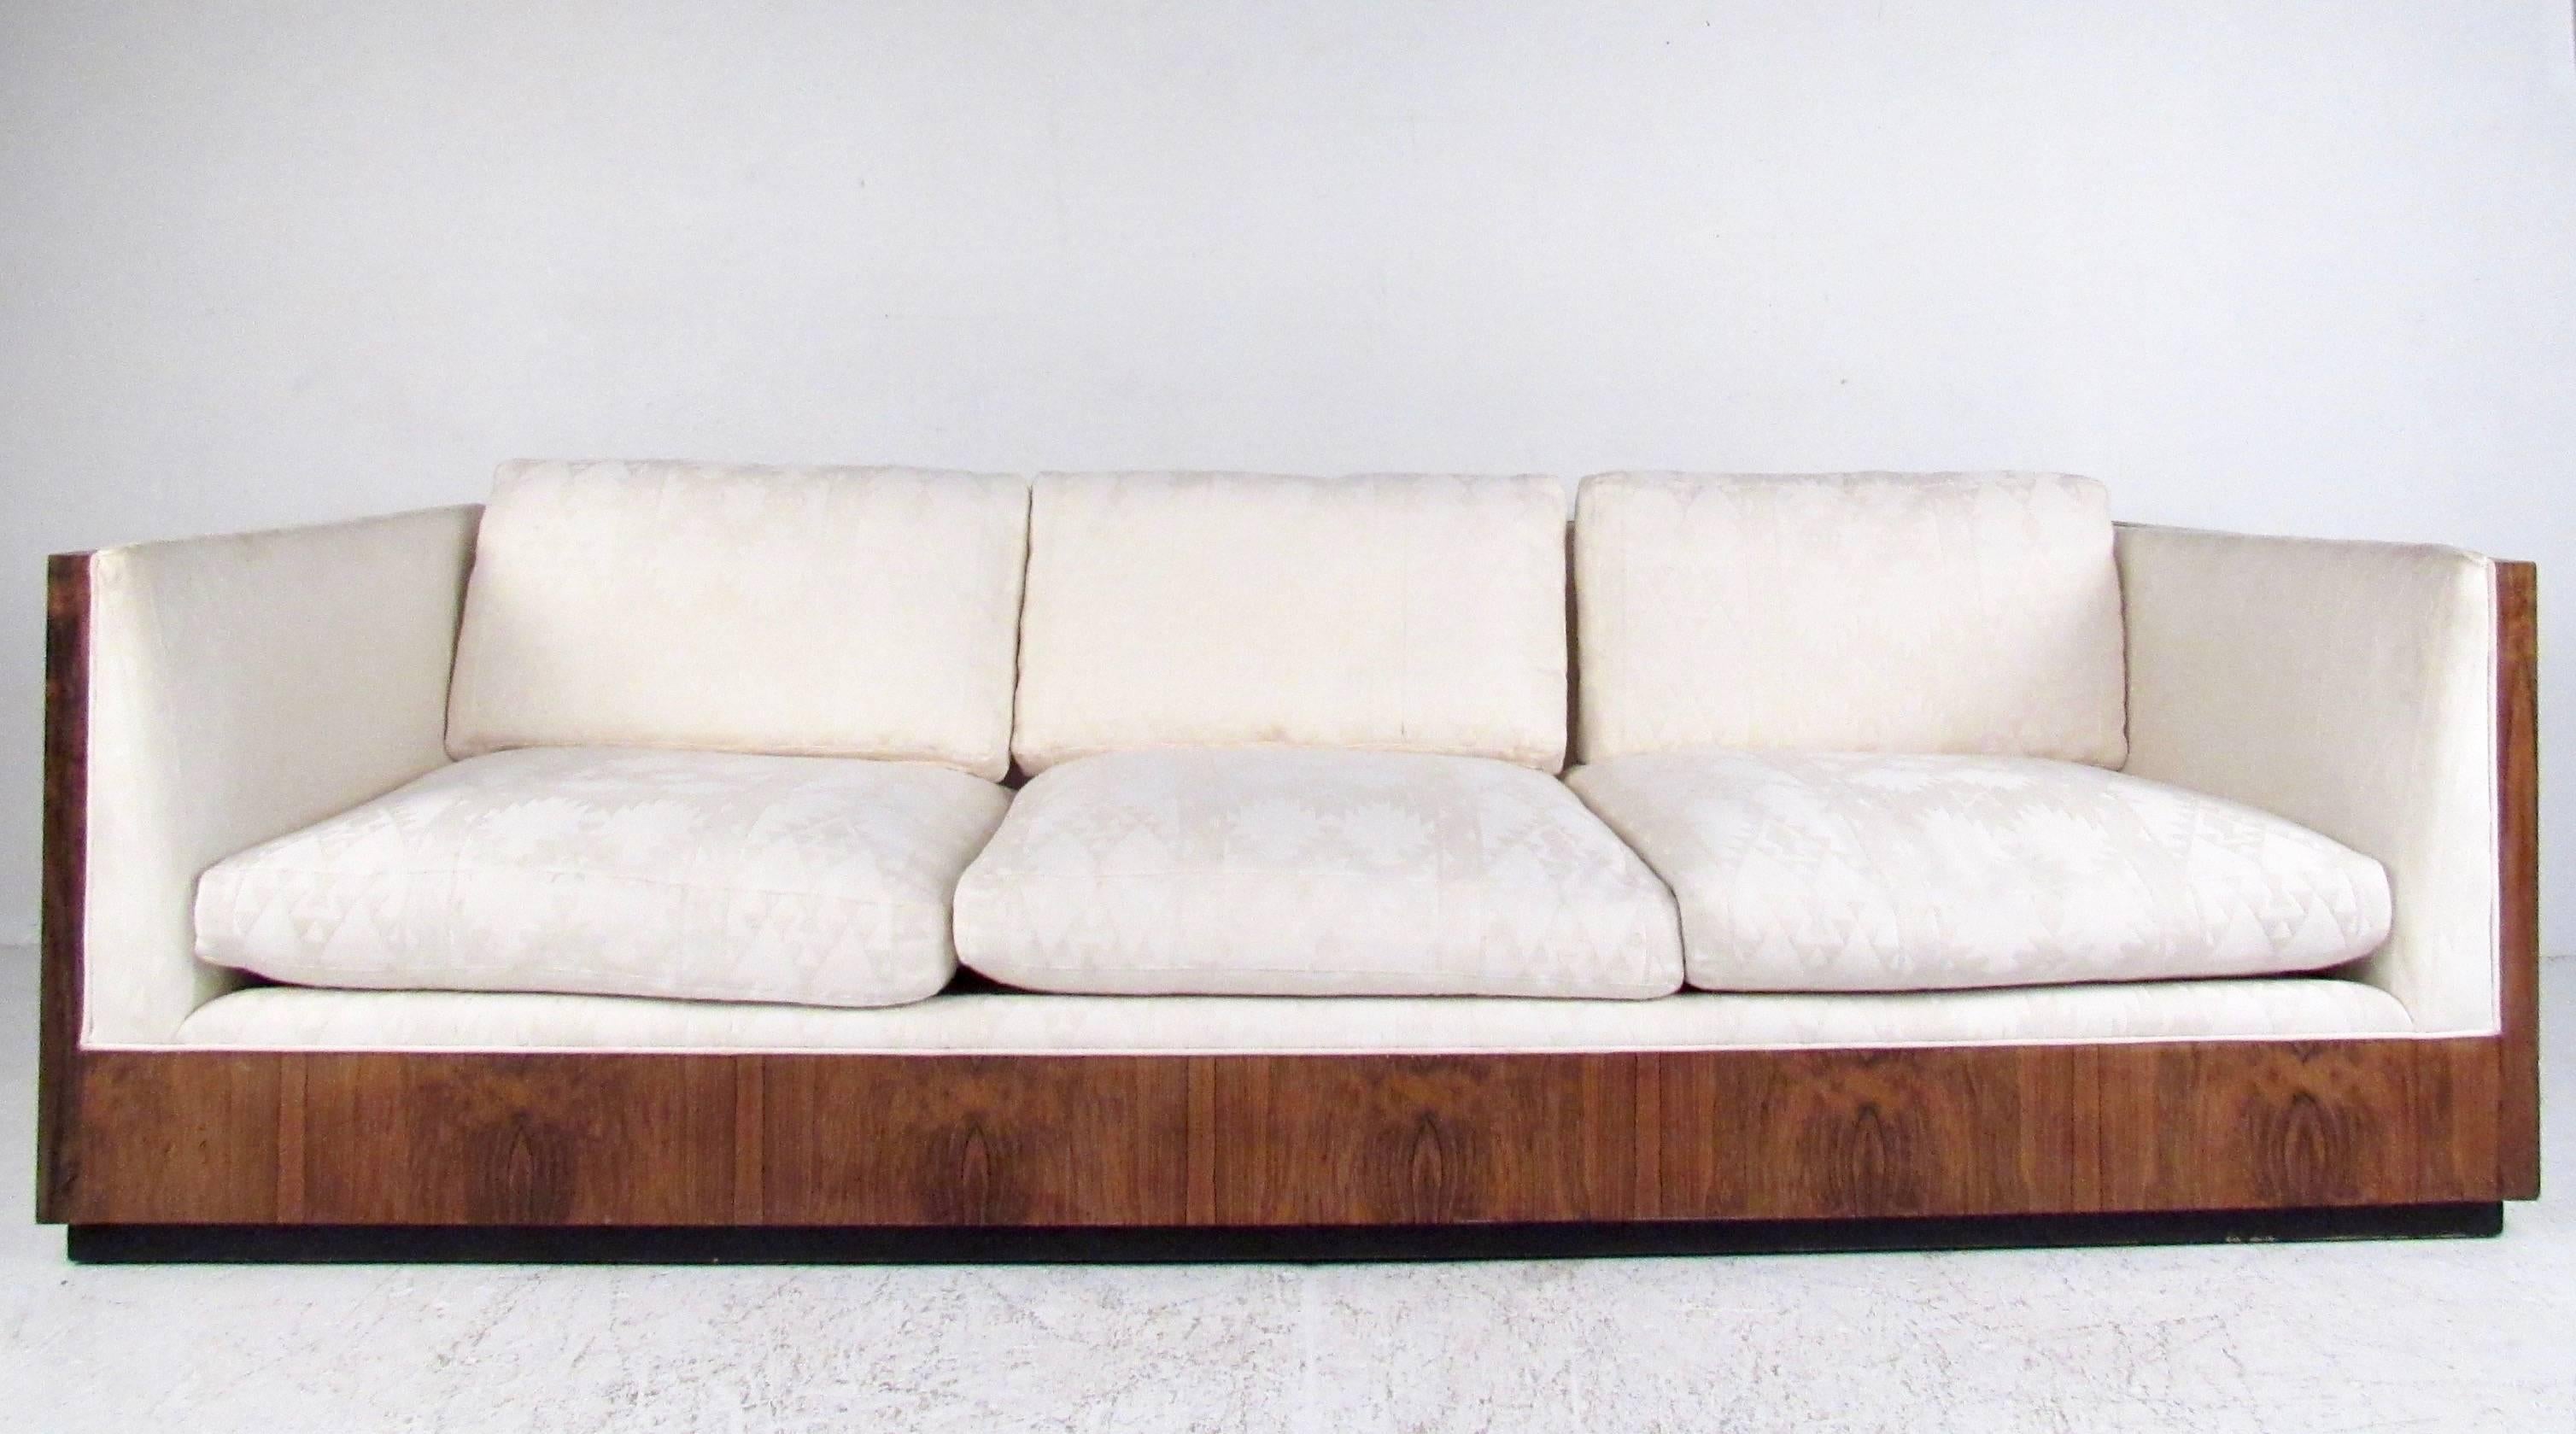 This stunning midcentury sofa features iconic Milo Baughman design for Thayer Coggin, featuring rosewood shell, wonderful vintage fabric, and comfortable seating for home or office. Original vintage condition includes manufacturing tag, please